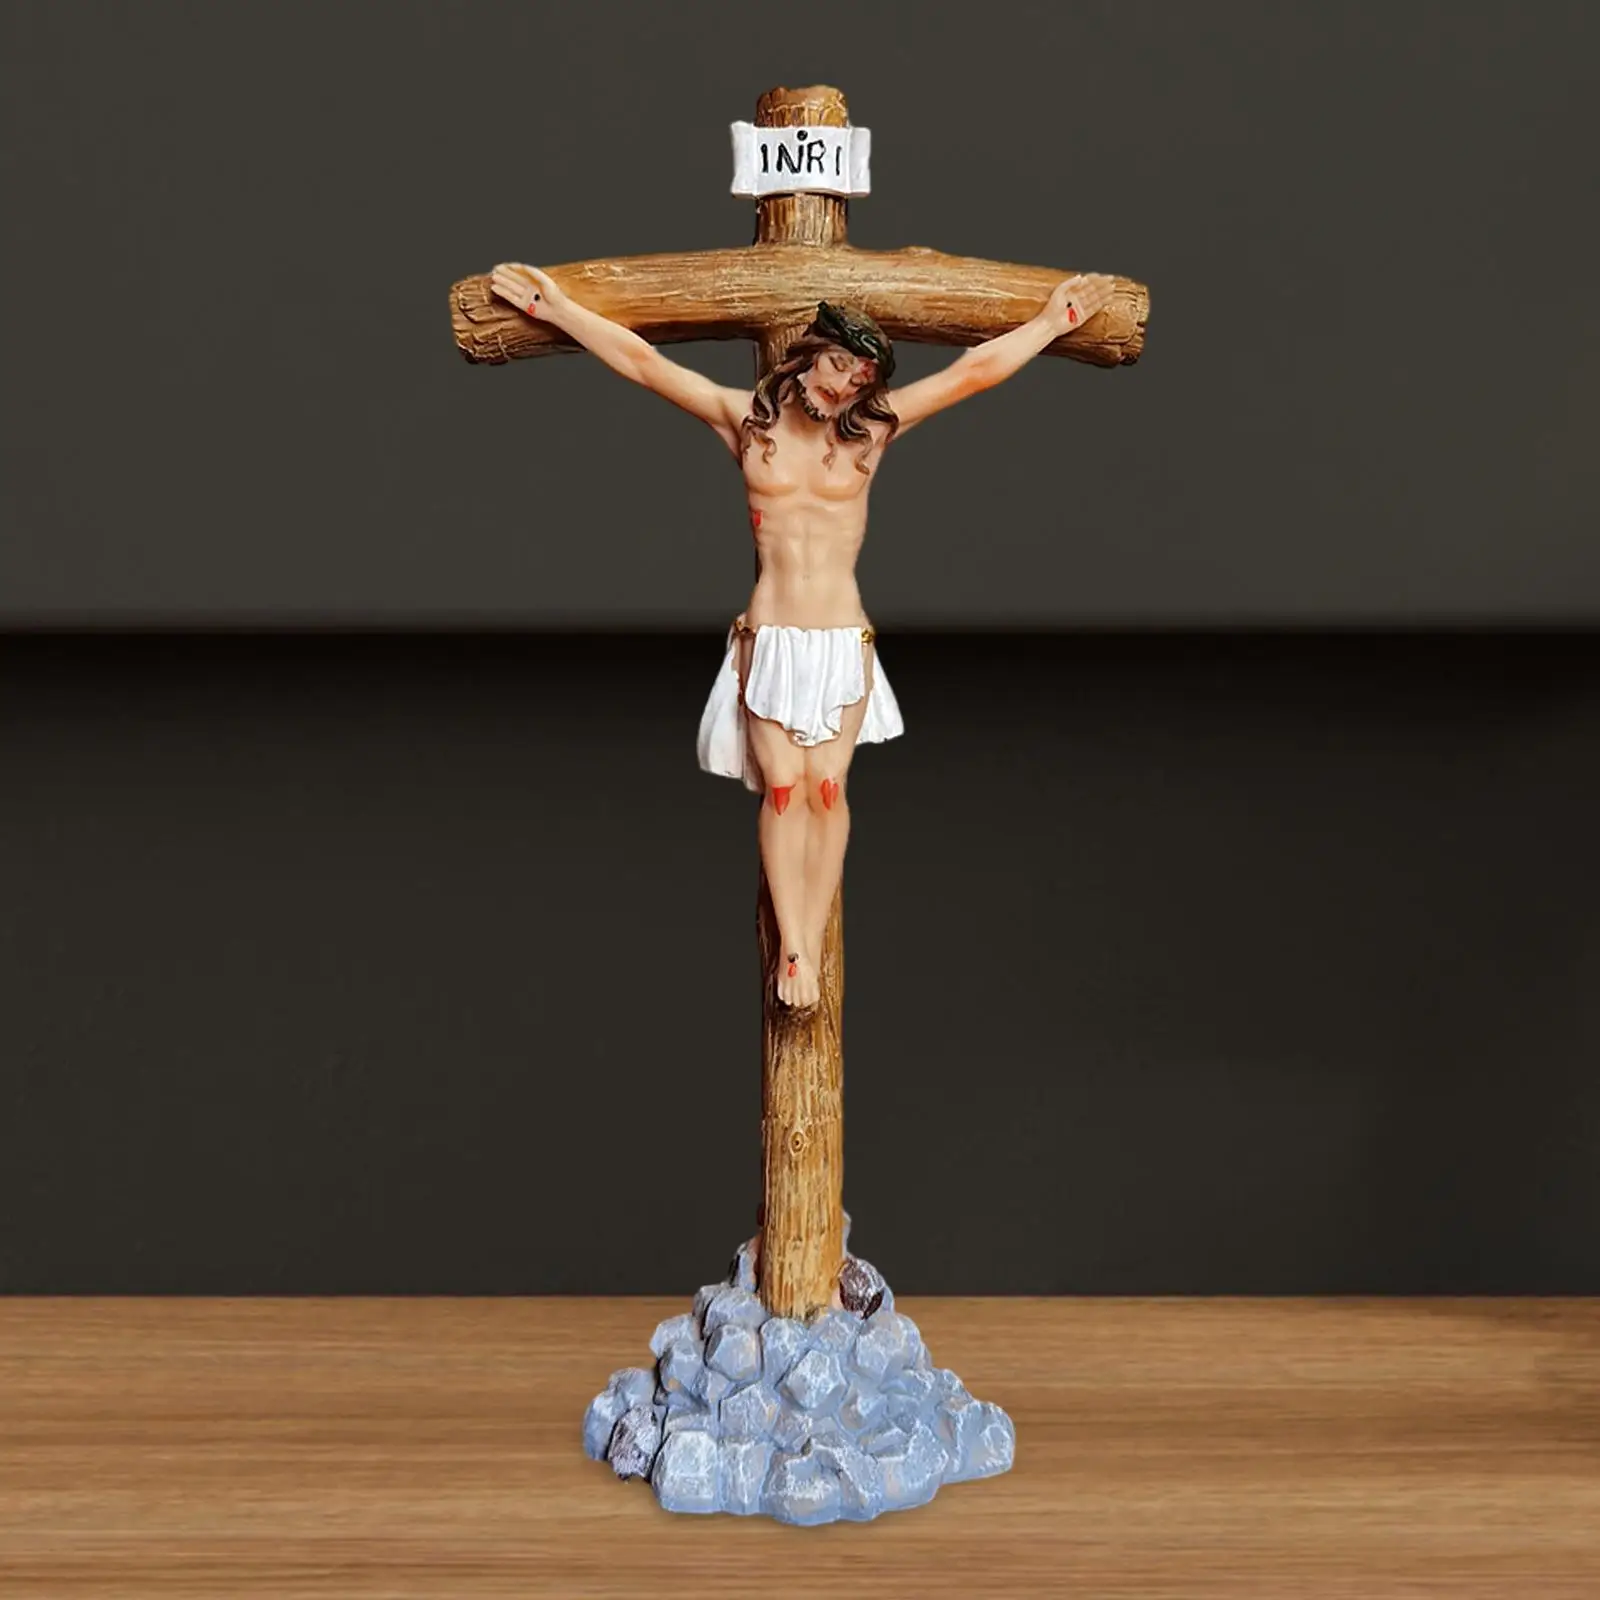 Jesus on The Cross Figurines Family Craftsmanship Risen Crucifix for Holiday Tabletop Housewarming Ornament 29cm Tall